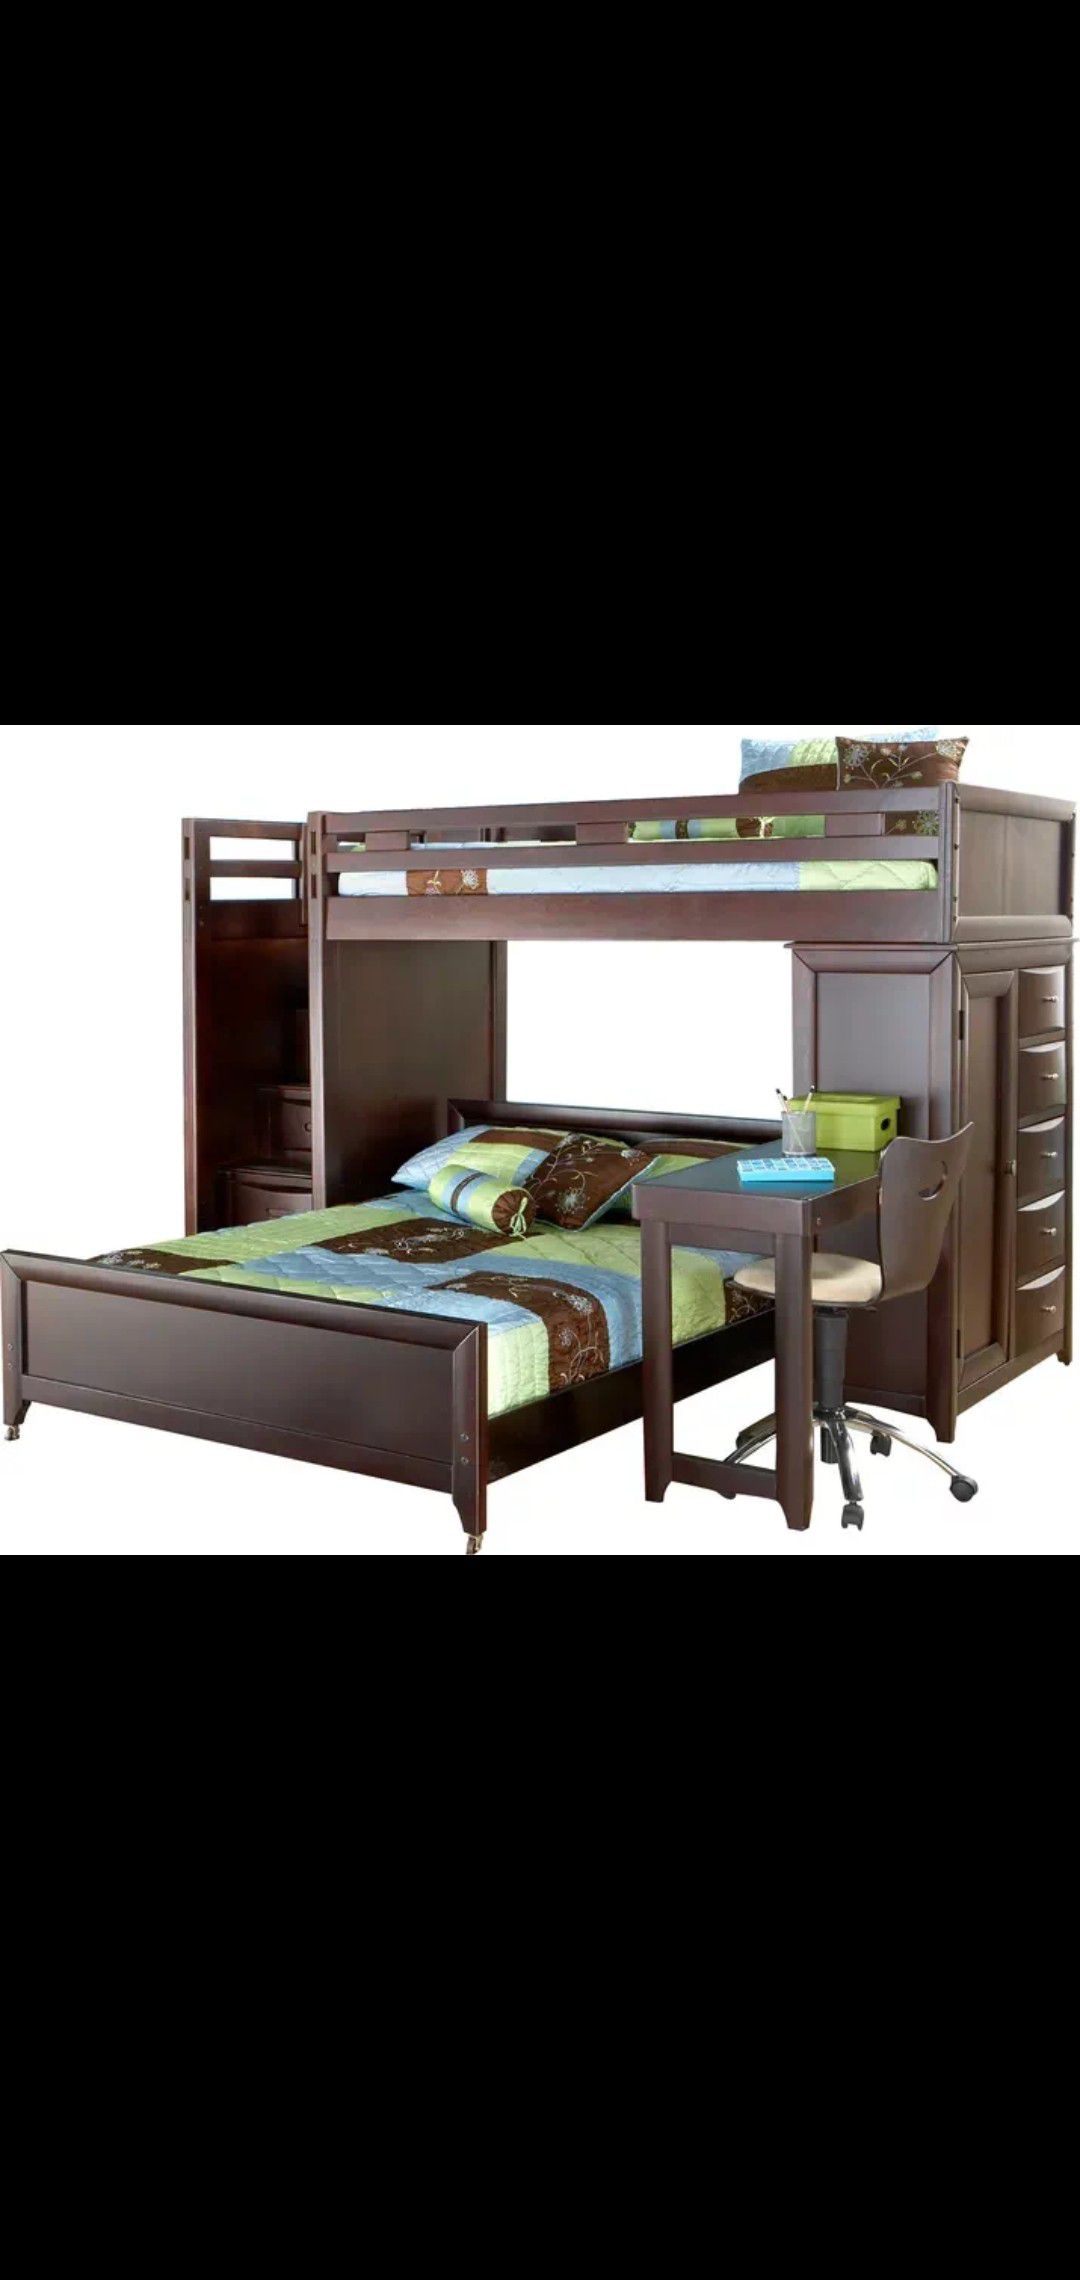 Newer Twin Solid Wood Step Loft Bunk Bed w/ Dresser Chest, Side Desk and Two Single Mattresses